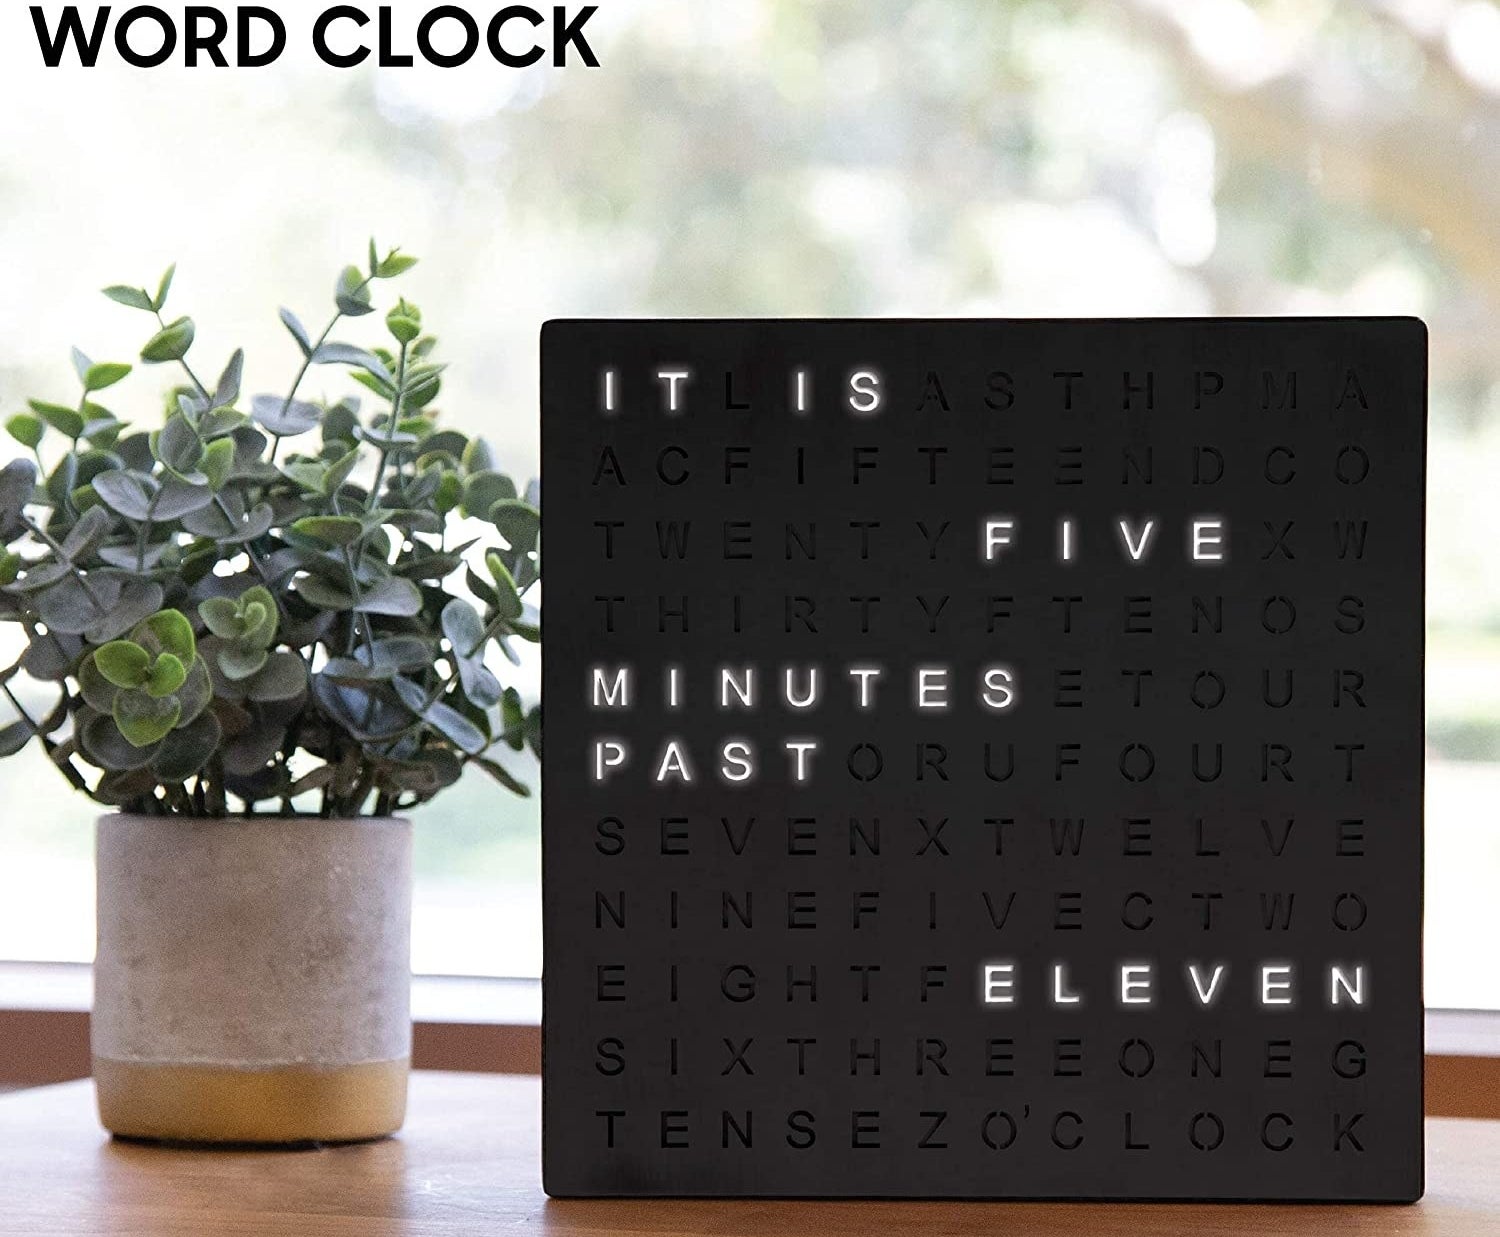 Word clock reading &quot;it is five minutes past eleven)